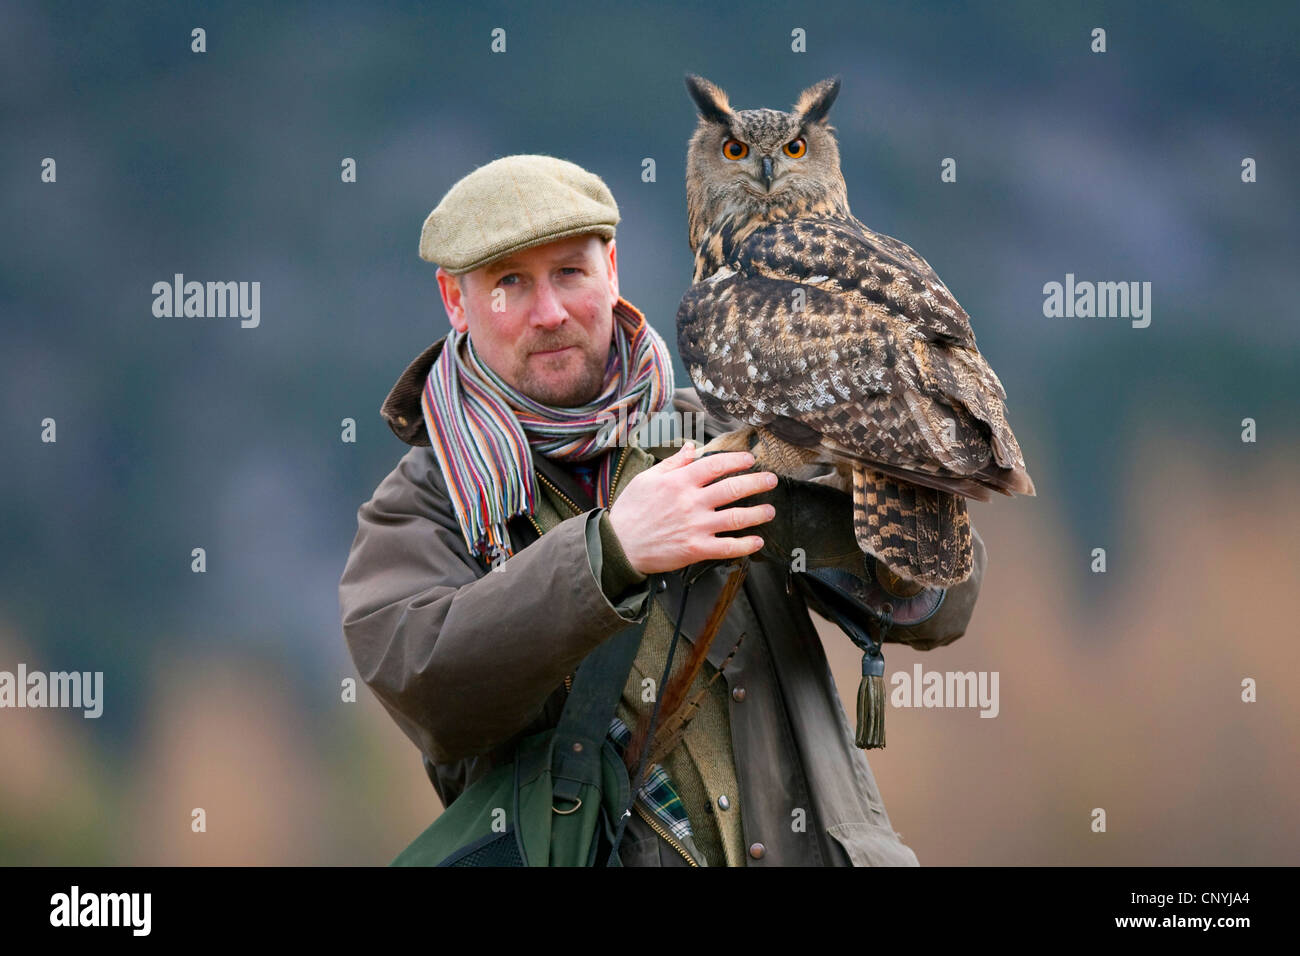 northern eagle owl (Bubo bubo), on a falconer's arm, Glenfeshie Stock Photo